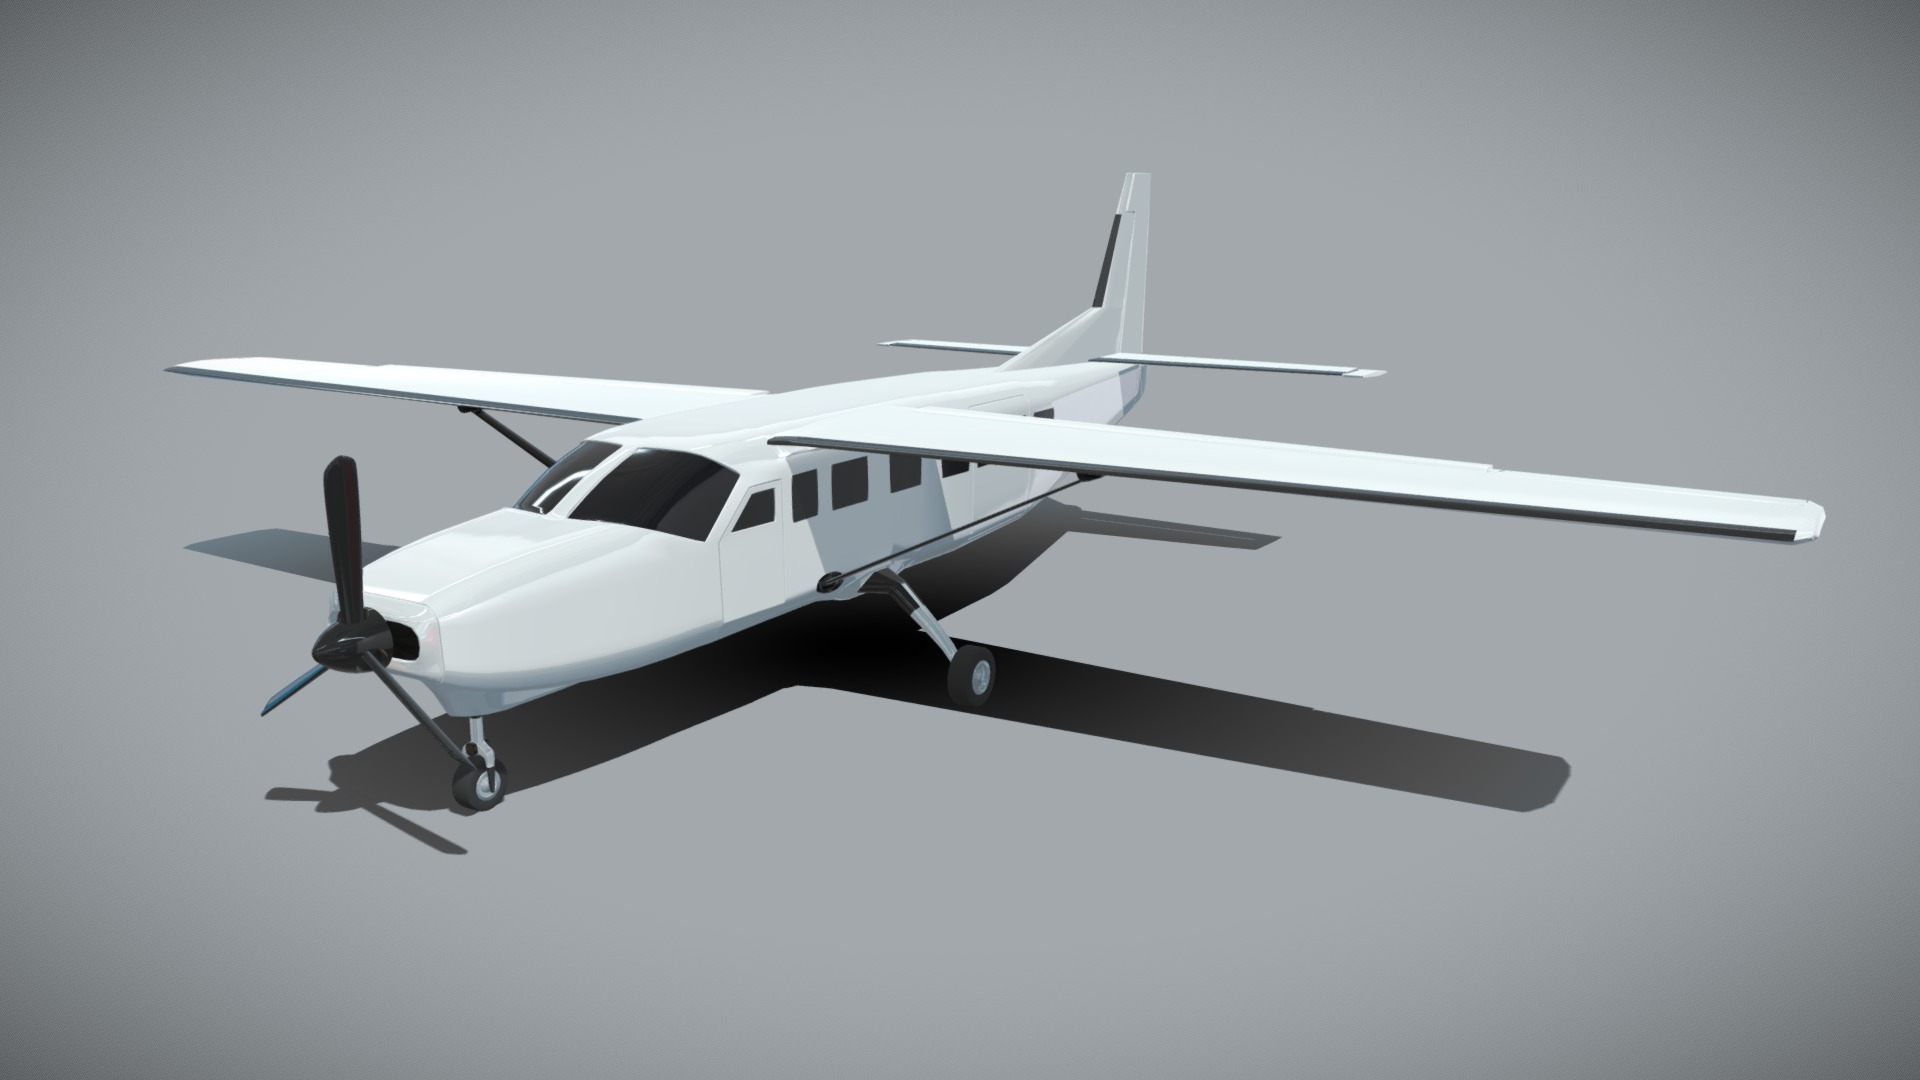 3D model Cessna Grand Caravan airplane - This is a 3D model of the Cessna Grand Caravan airplane. The 3D model is about a small white airplane.